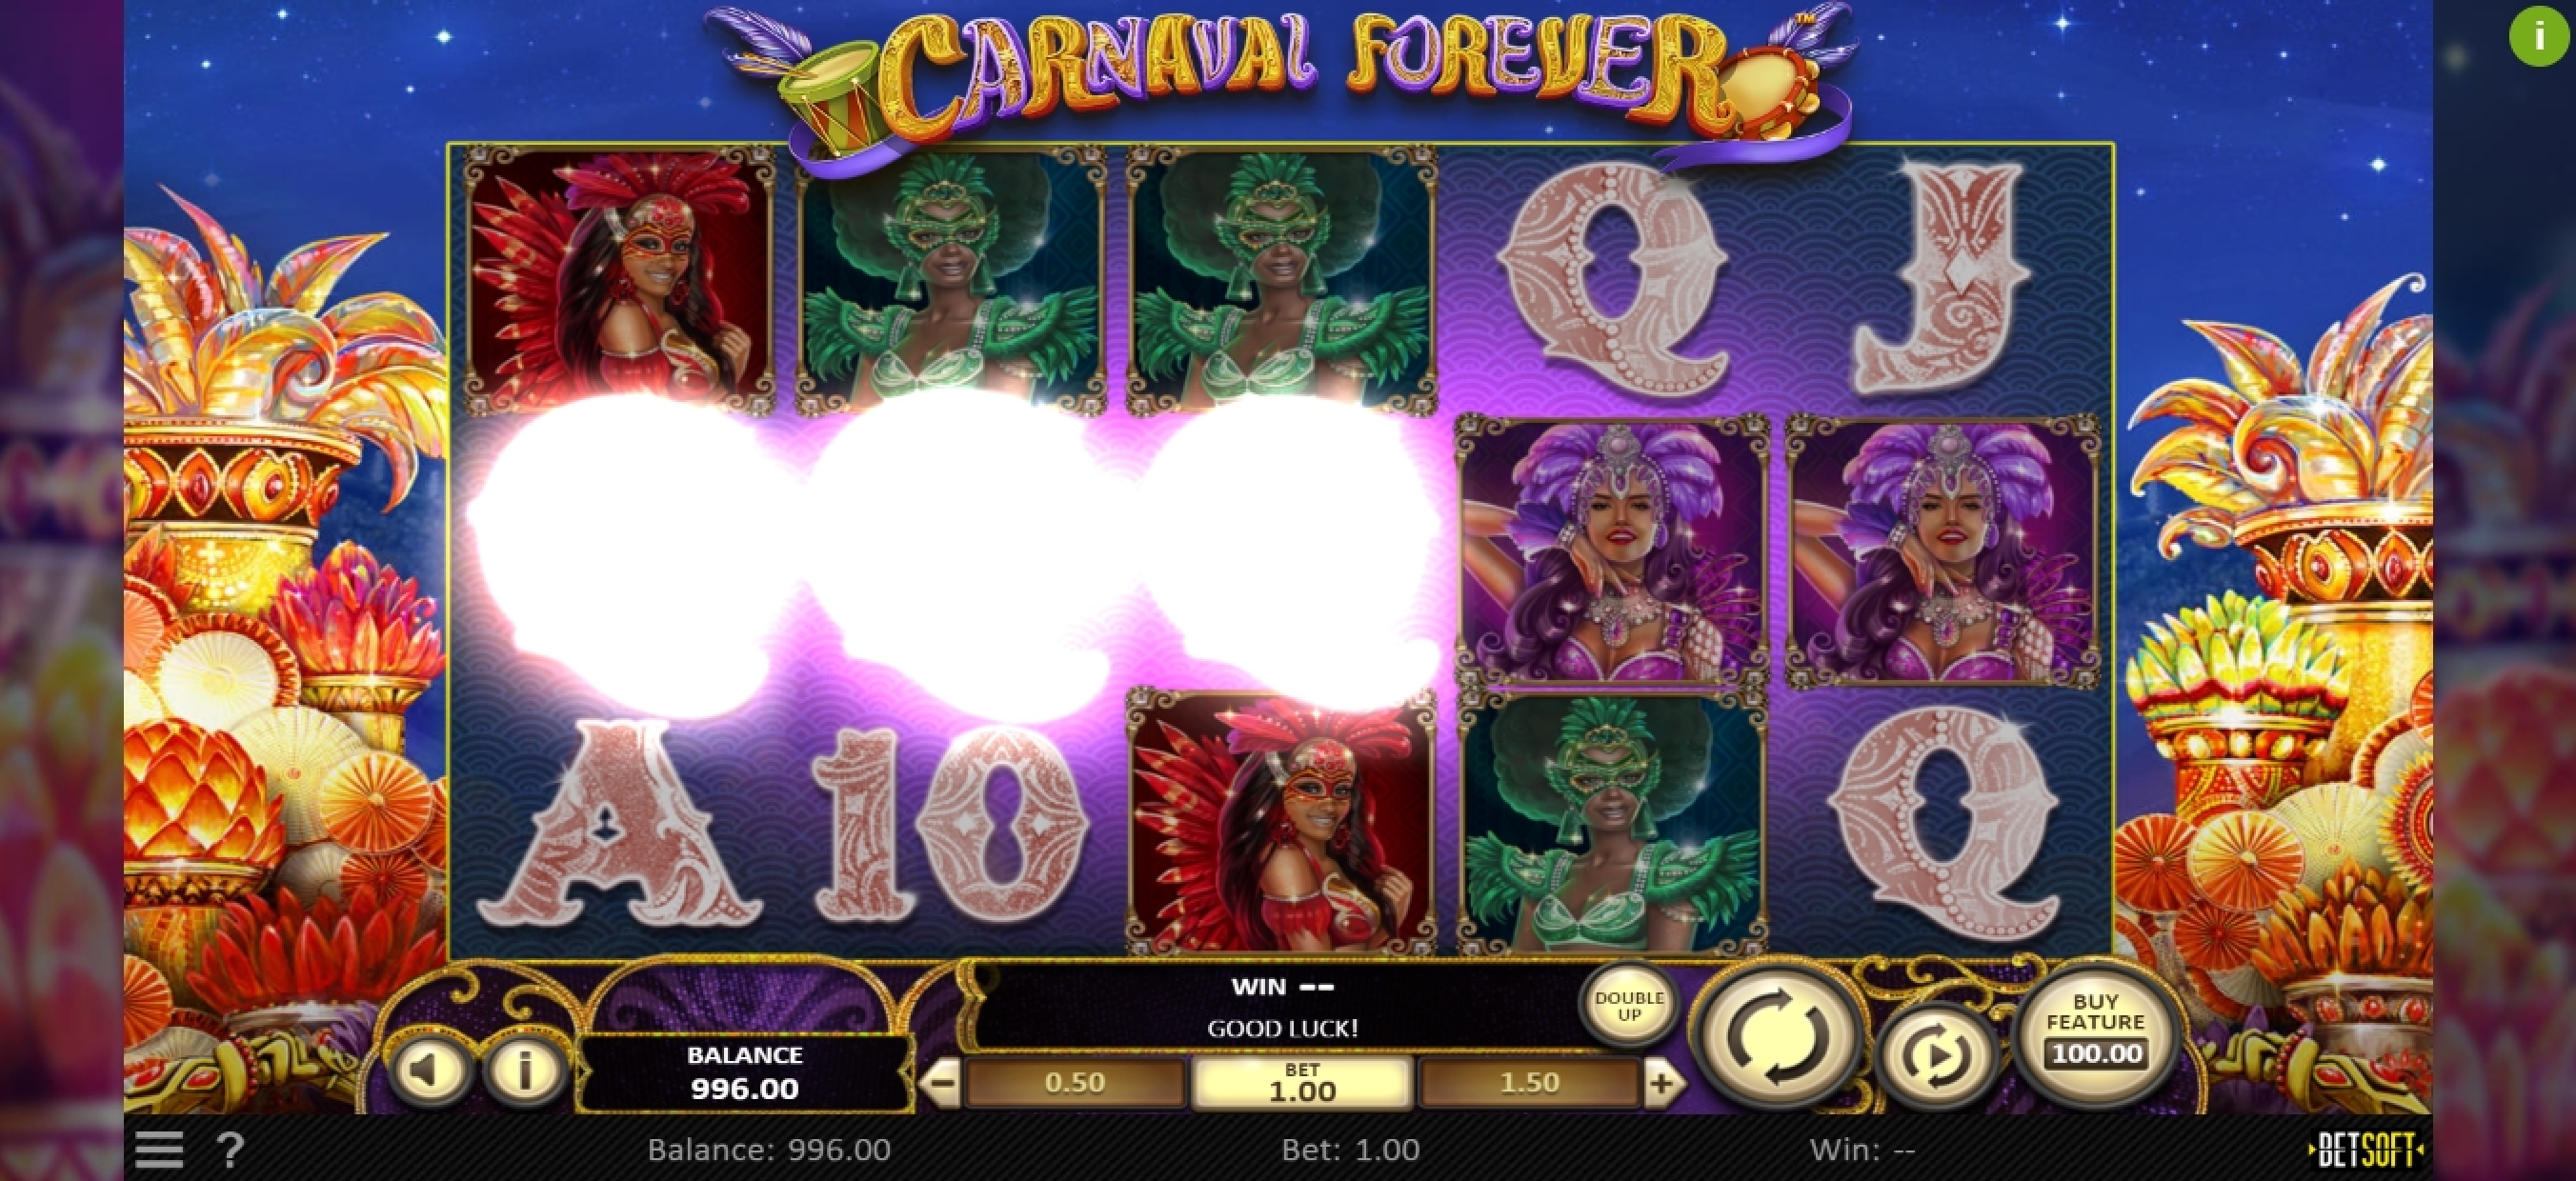 Win Money in Carnaval Forever Free Slot Game by Betsoft